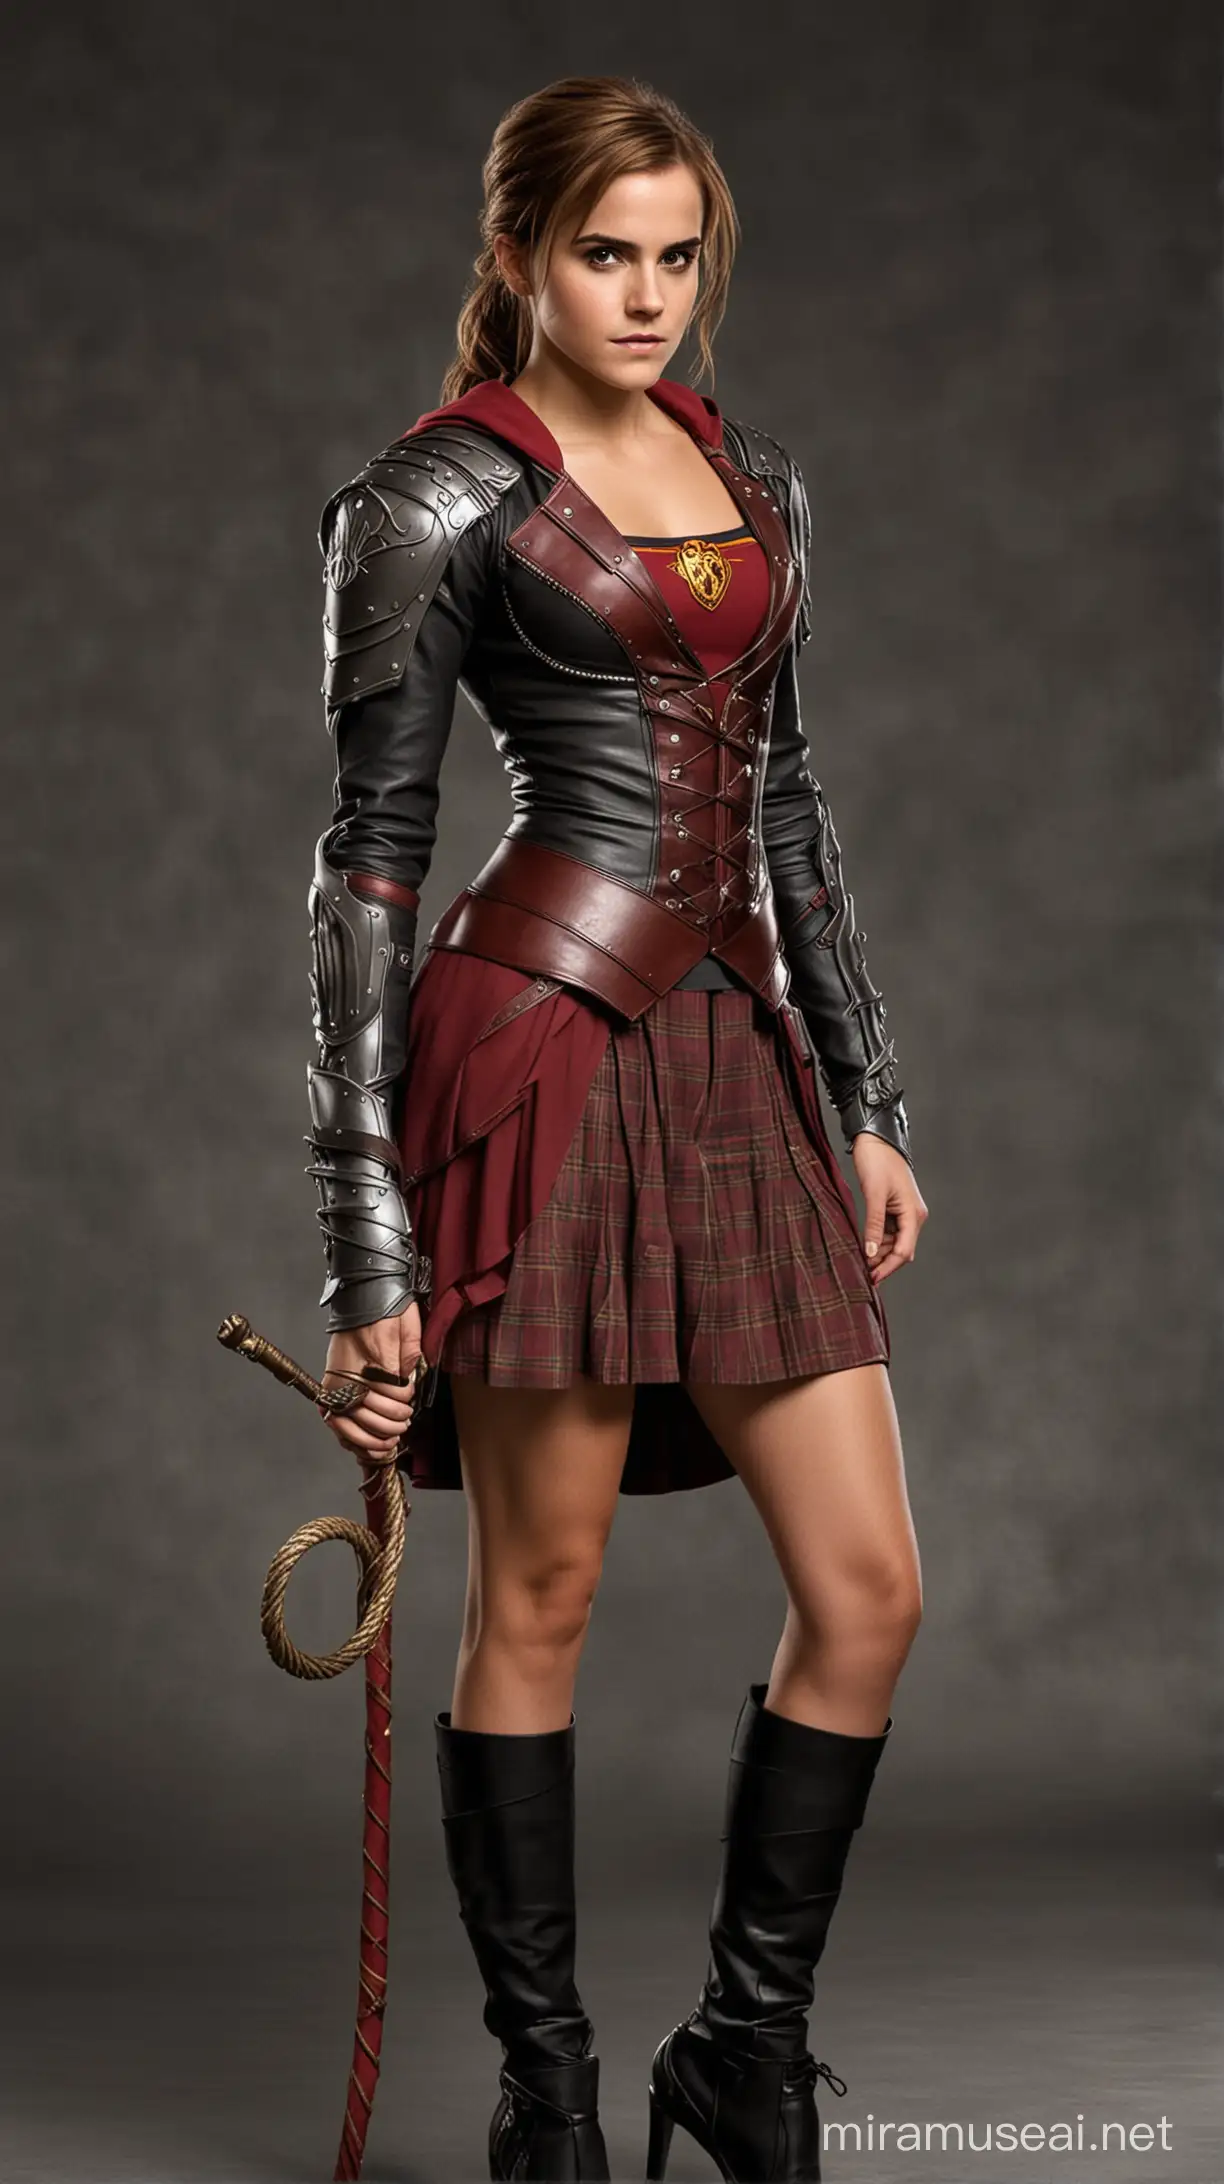 Emma Watson Strong and Confident in Gryffindor Bikini Armor with Bullwhip